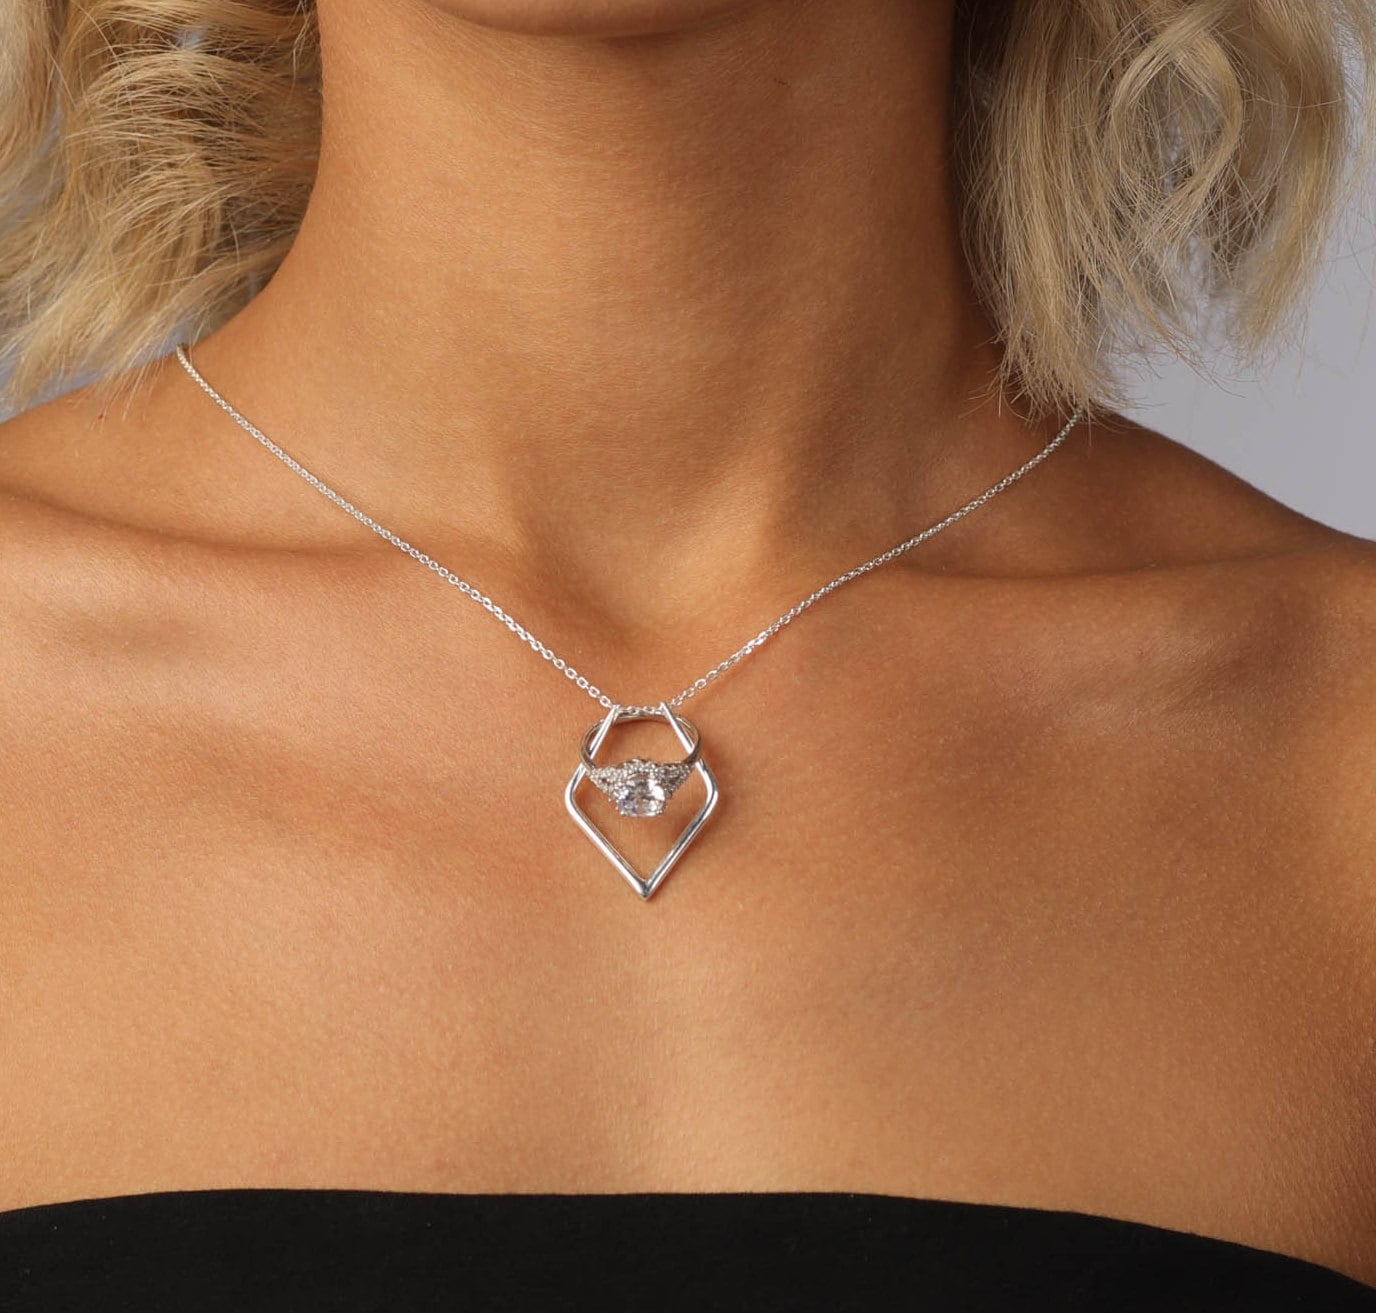 Ring Holder Necklace Geometric